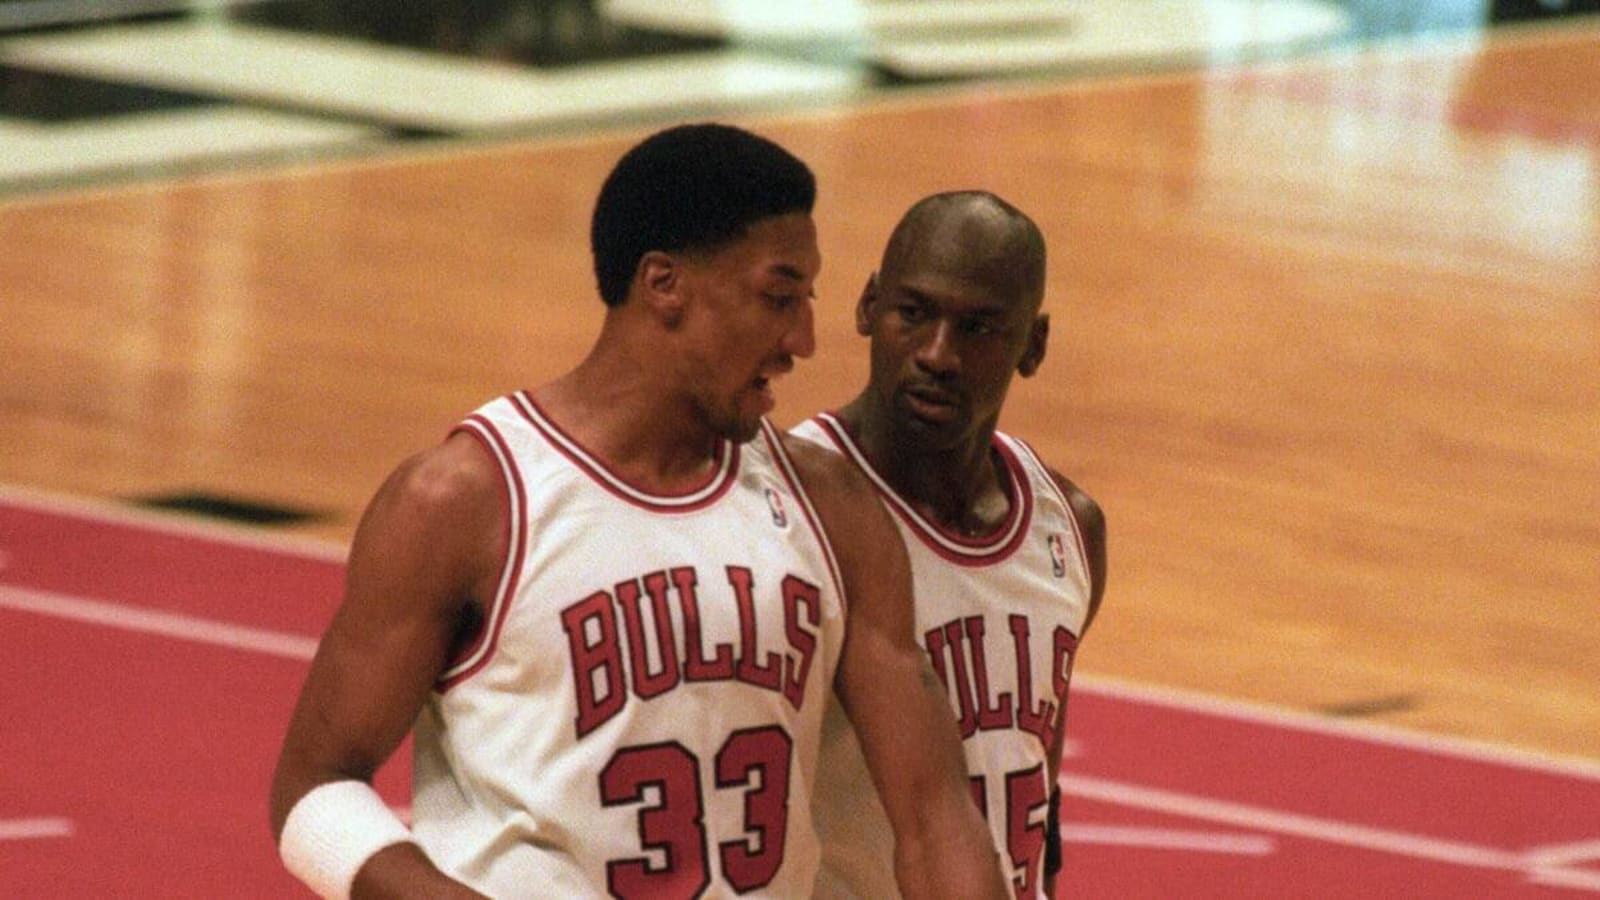 Kenny Beecham talked about his Chicago Bulls Mt. Rushmore